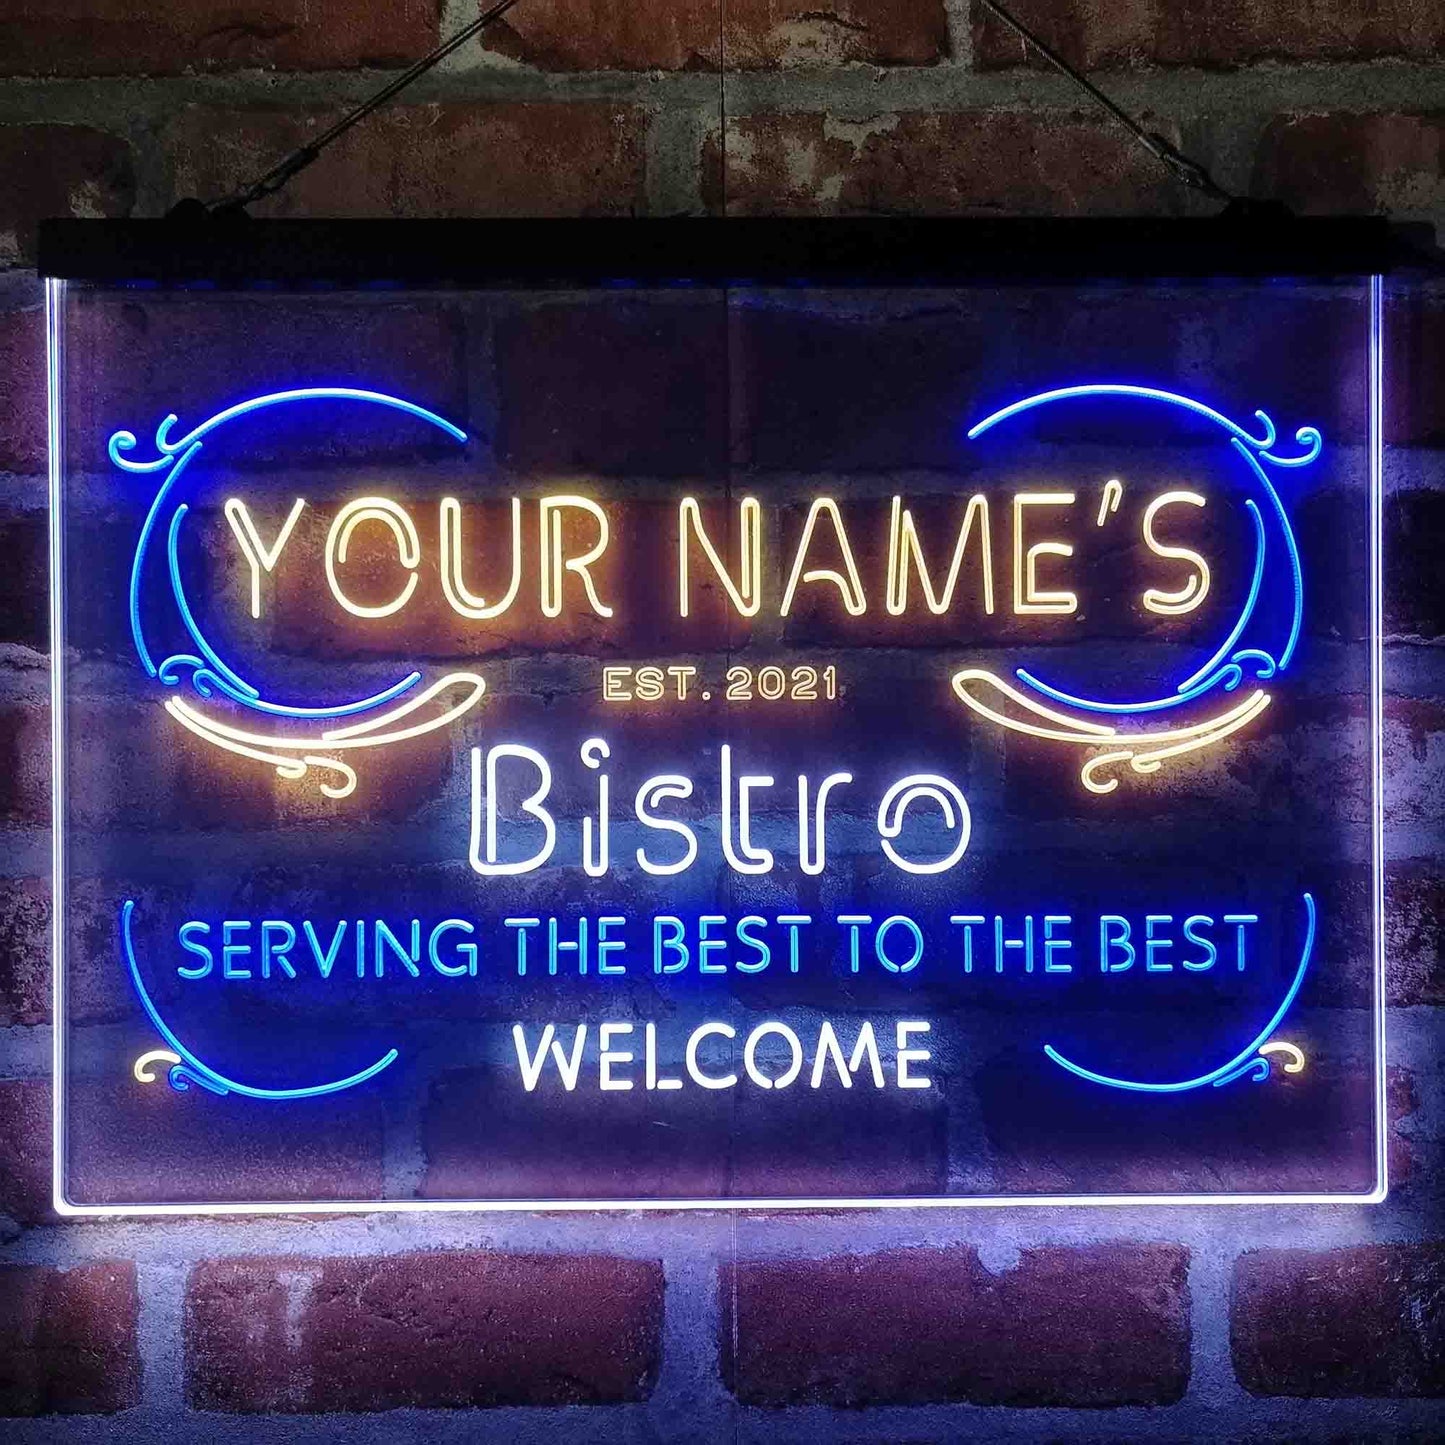 Personalized Bistro Kitchen Deco 3-Color LED Neon Light Sign - Way Up Gifts